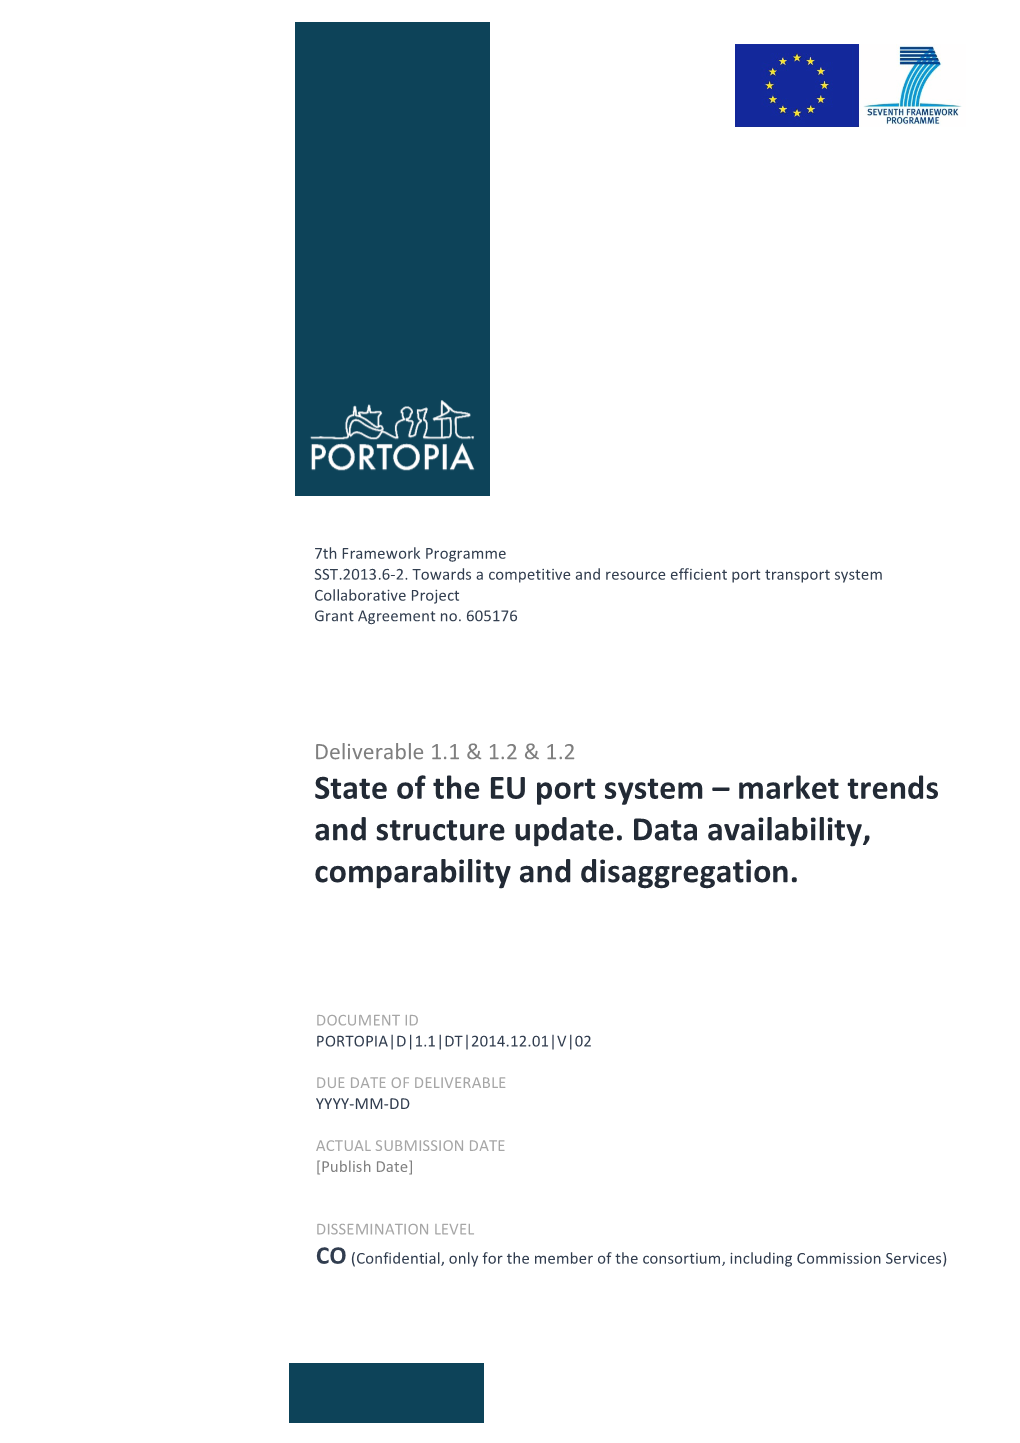 D.1.1 State of the EU Port System – Market Trends and Structure Update